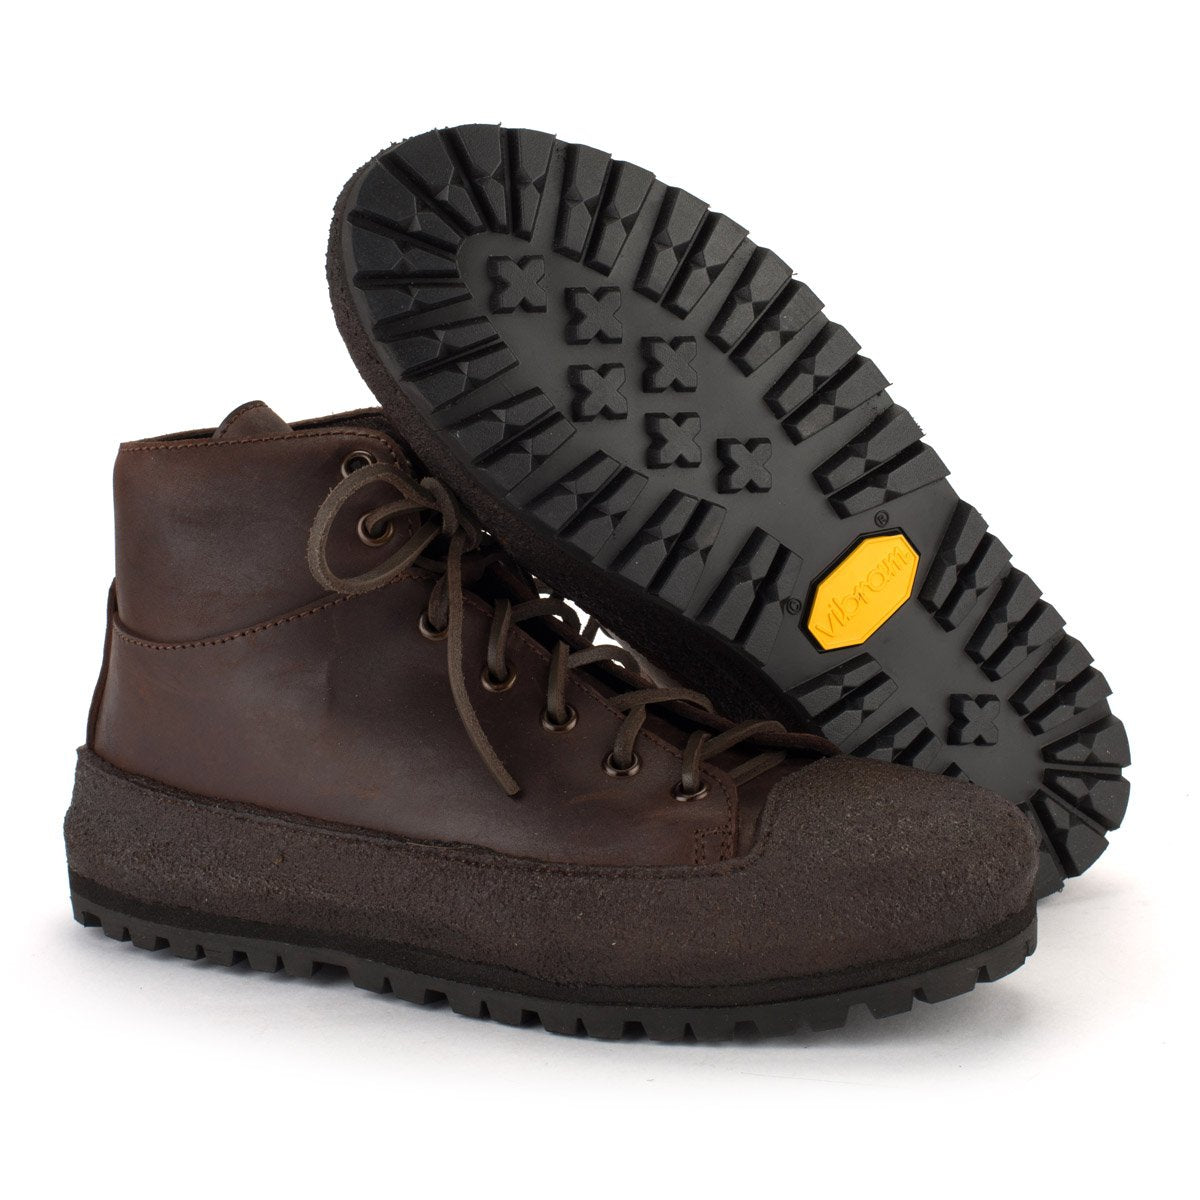 CR 24 WATER PROOF BOOTS – Coffe